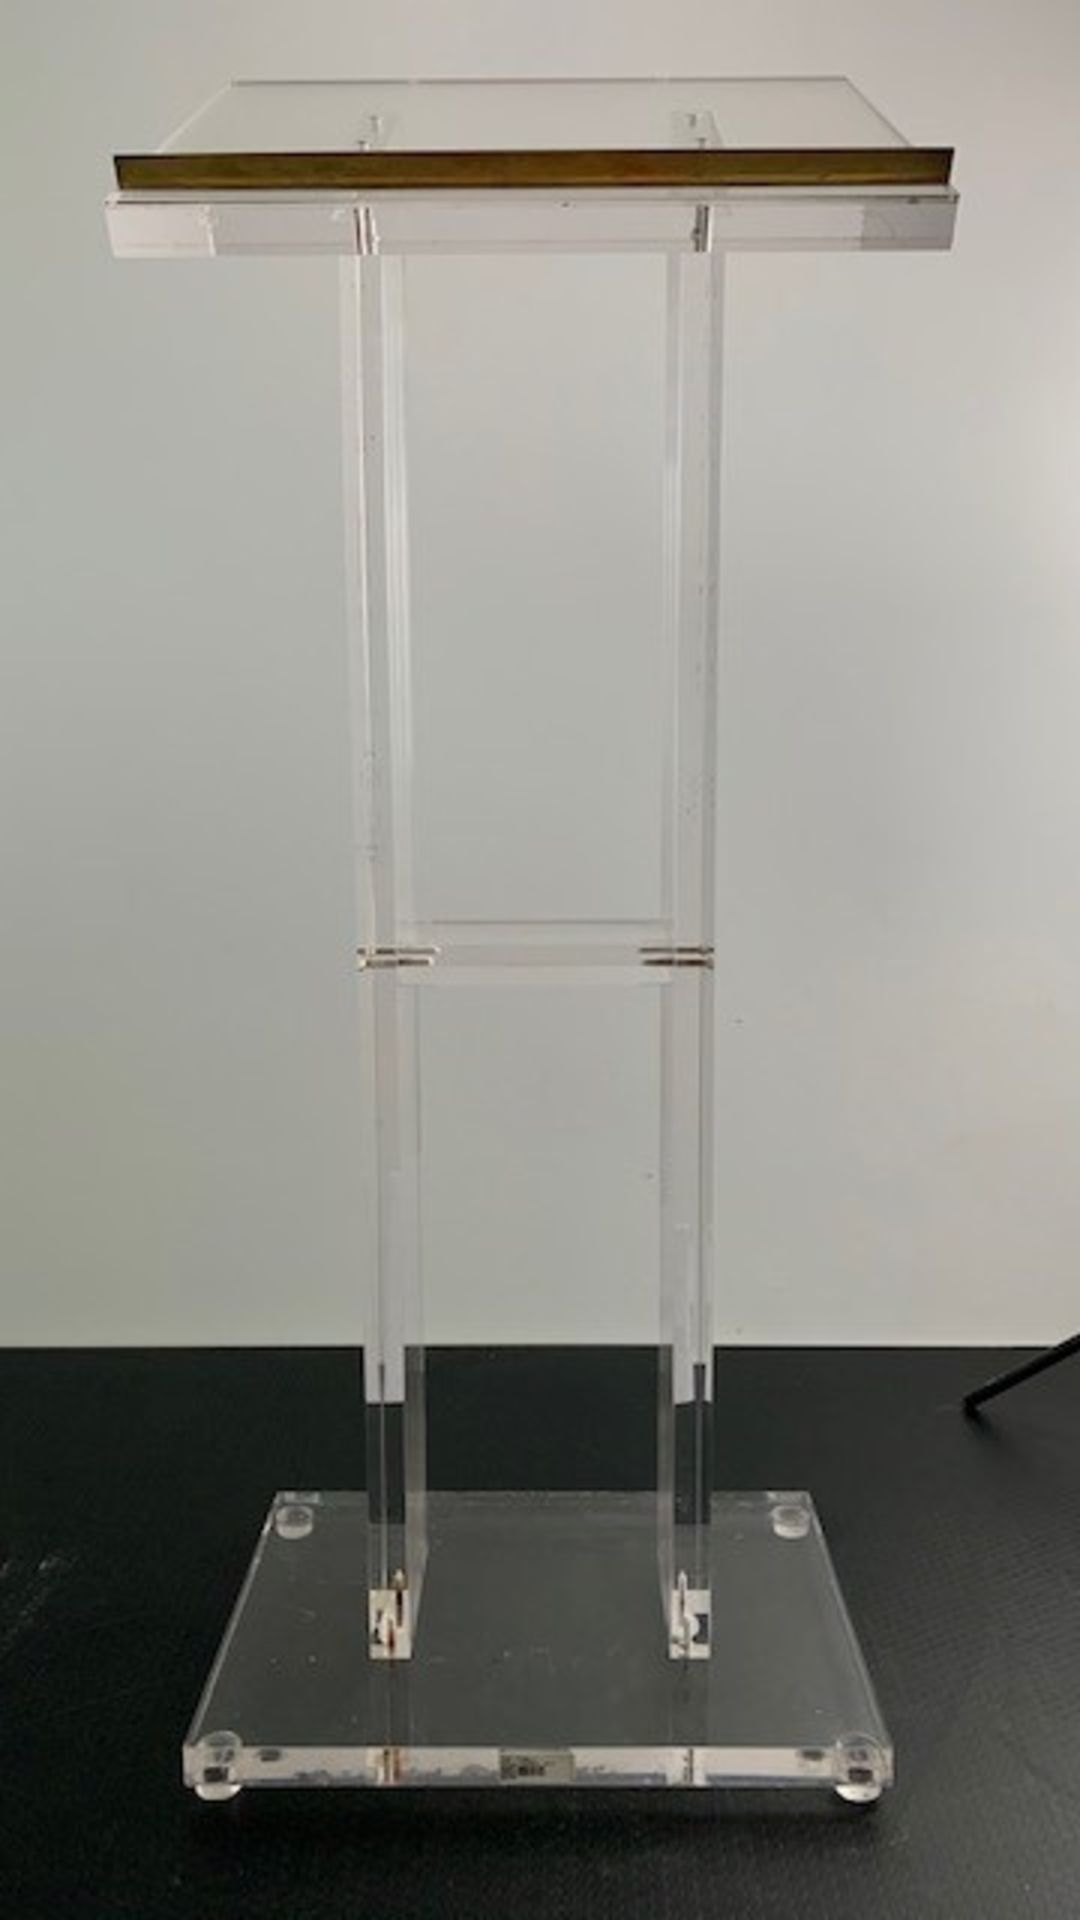 1 x High Quality Perspex Lectern In A Custom Wheeled Flight Case - Ref: 672 - CL581